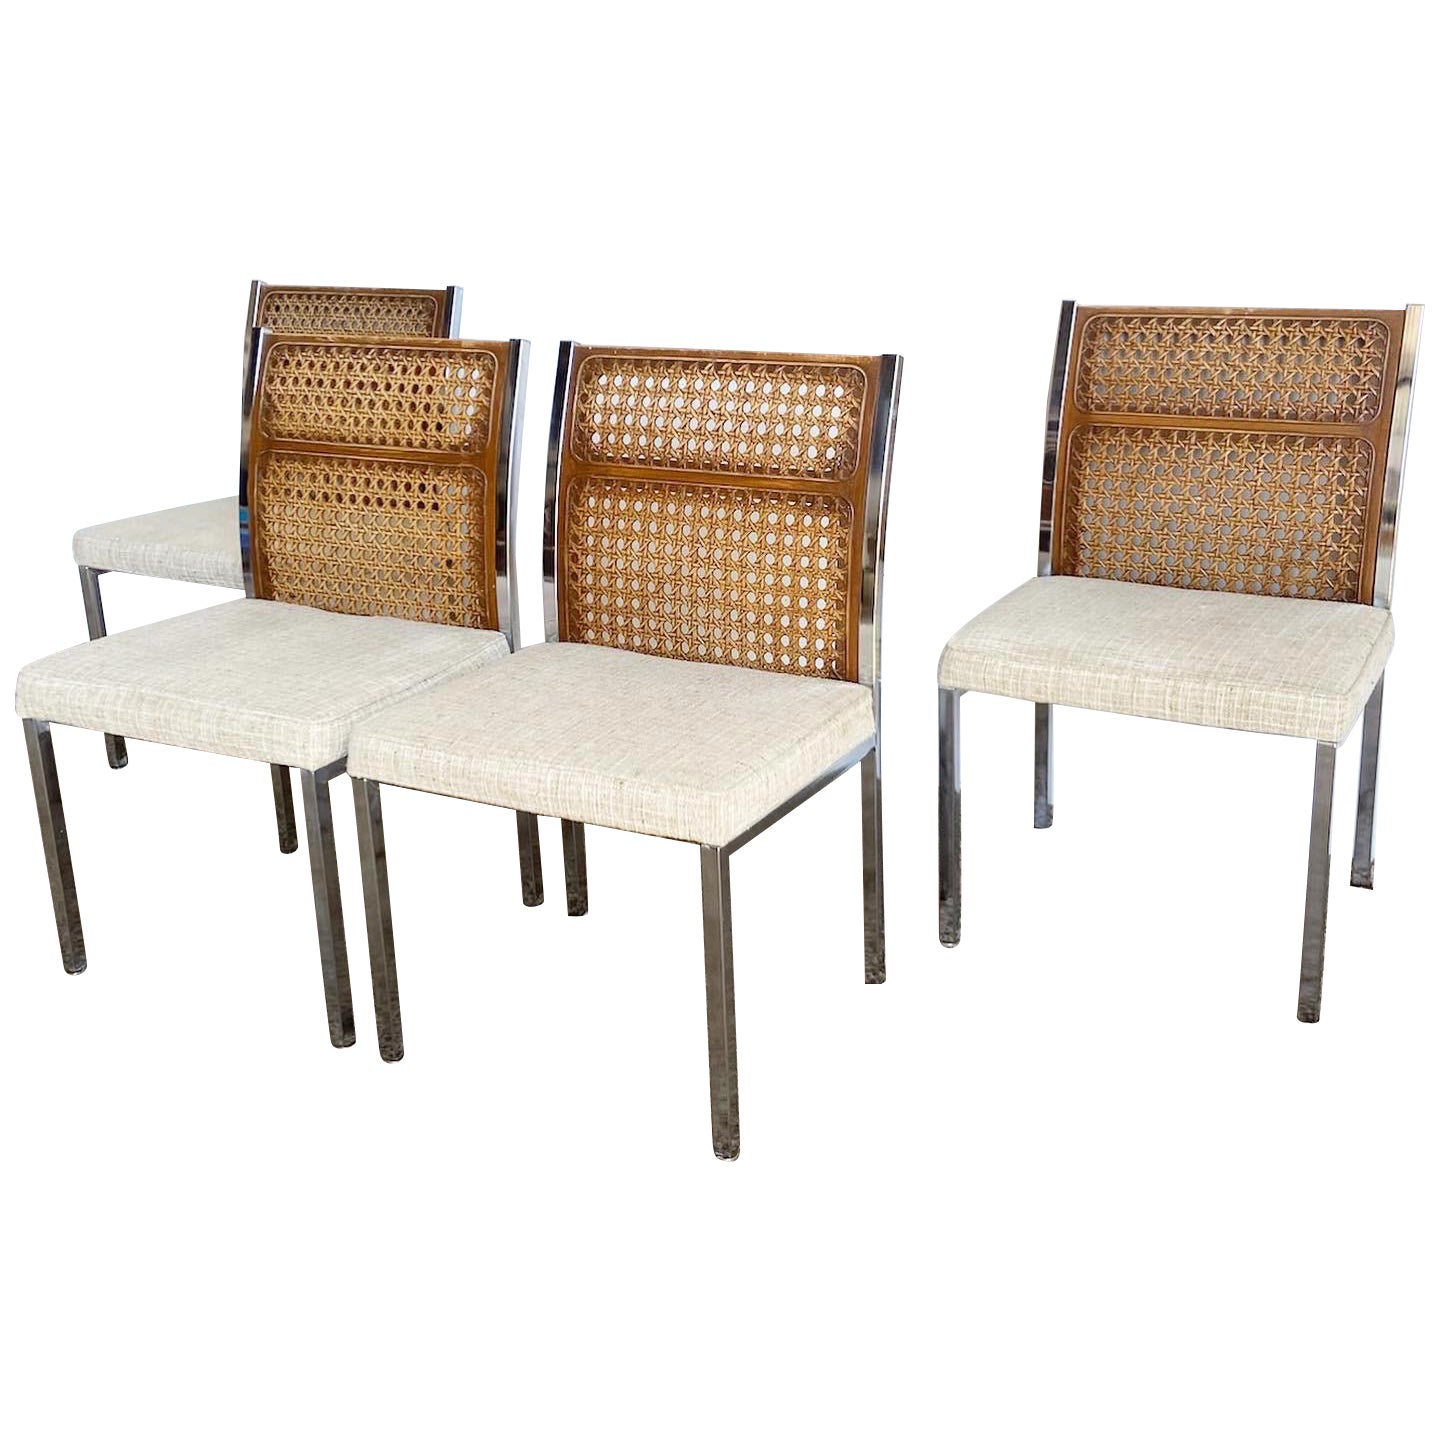 Mid Century Modern Faux Cane and Chrome Dining Chairs - Set of 4